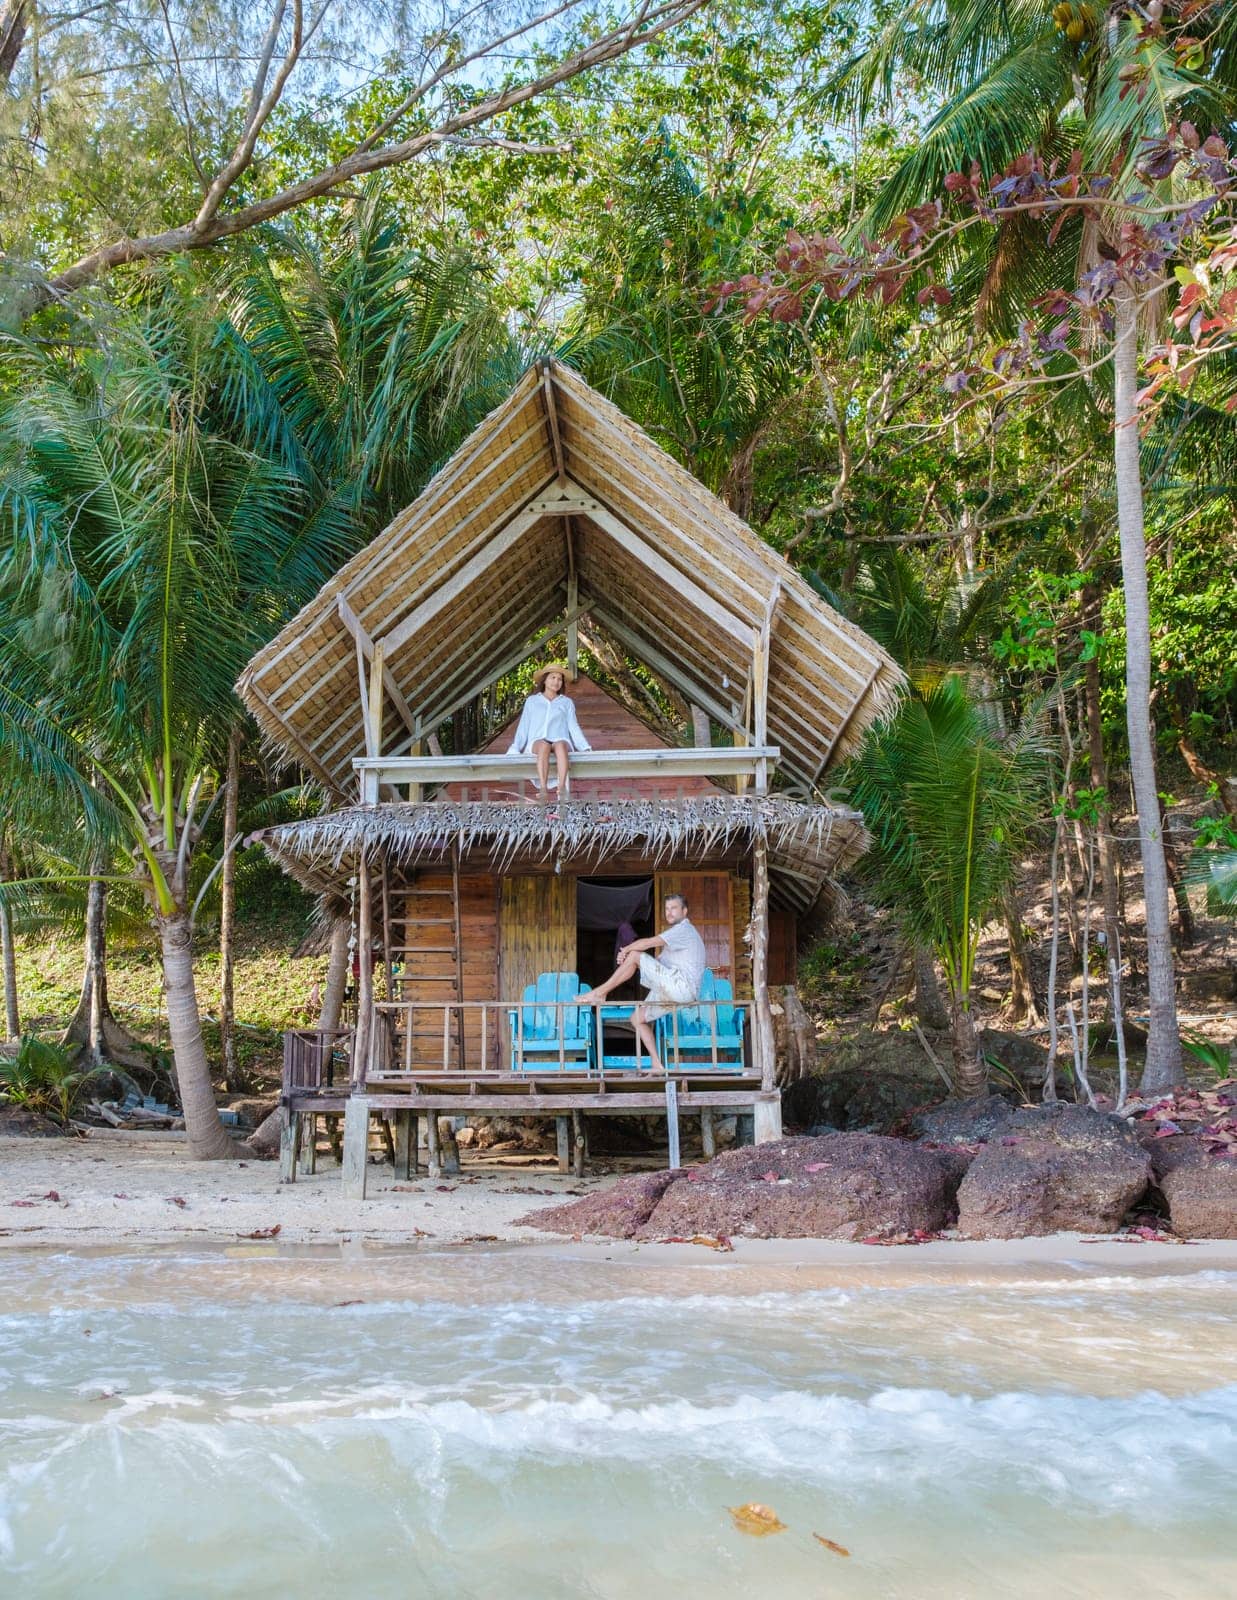 Koh Wai Island Trat Thailand is a tinny tropical Island near Koh Chang. wooden bamboo hut bungalow on the beach. a young couple of men and woman on a tropical Island in Thailand on a sunny morning